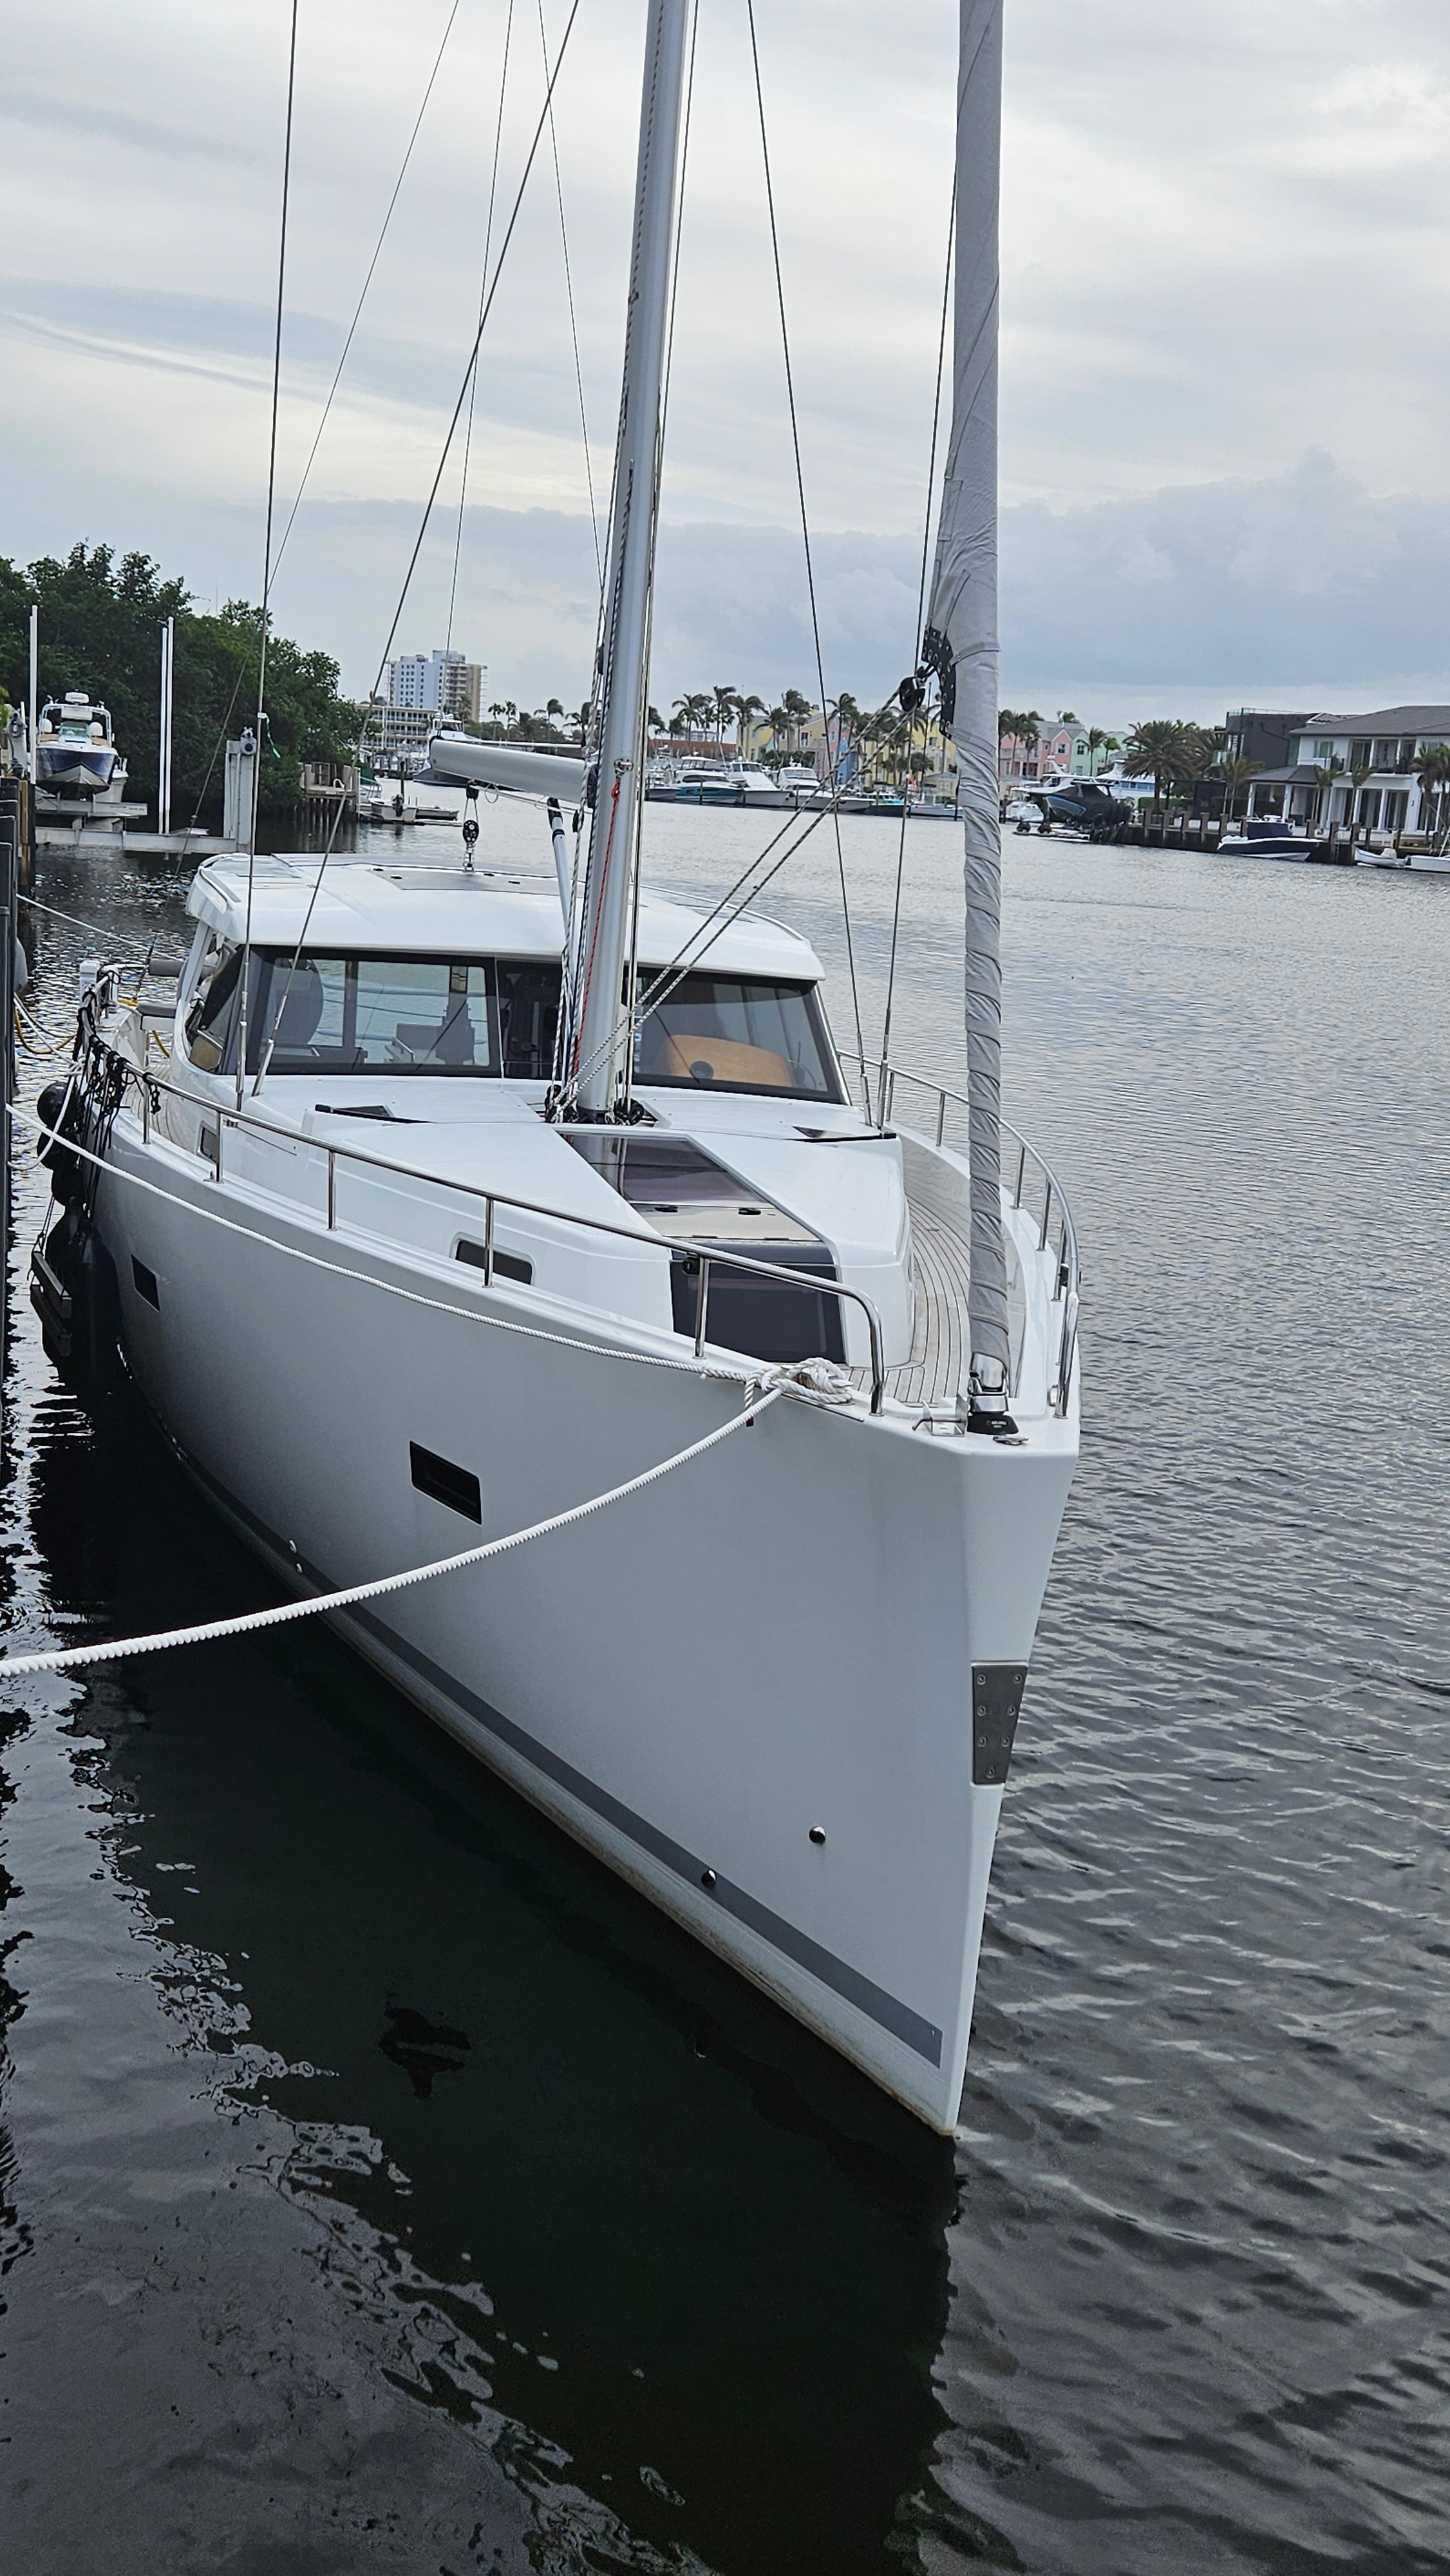 Used Sail Monohull for Sale 2021 Moody Deck Salon 45 Additional Information